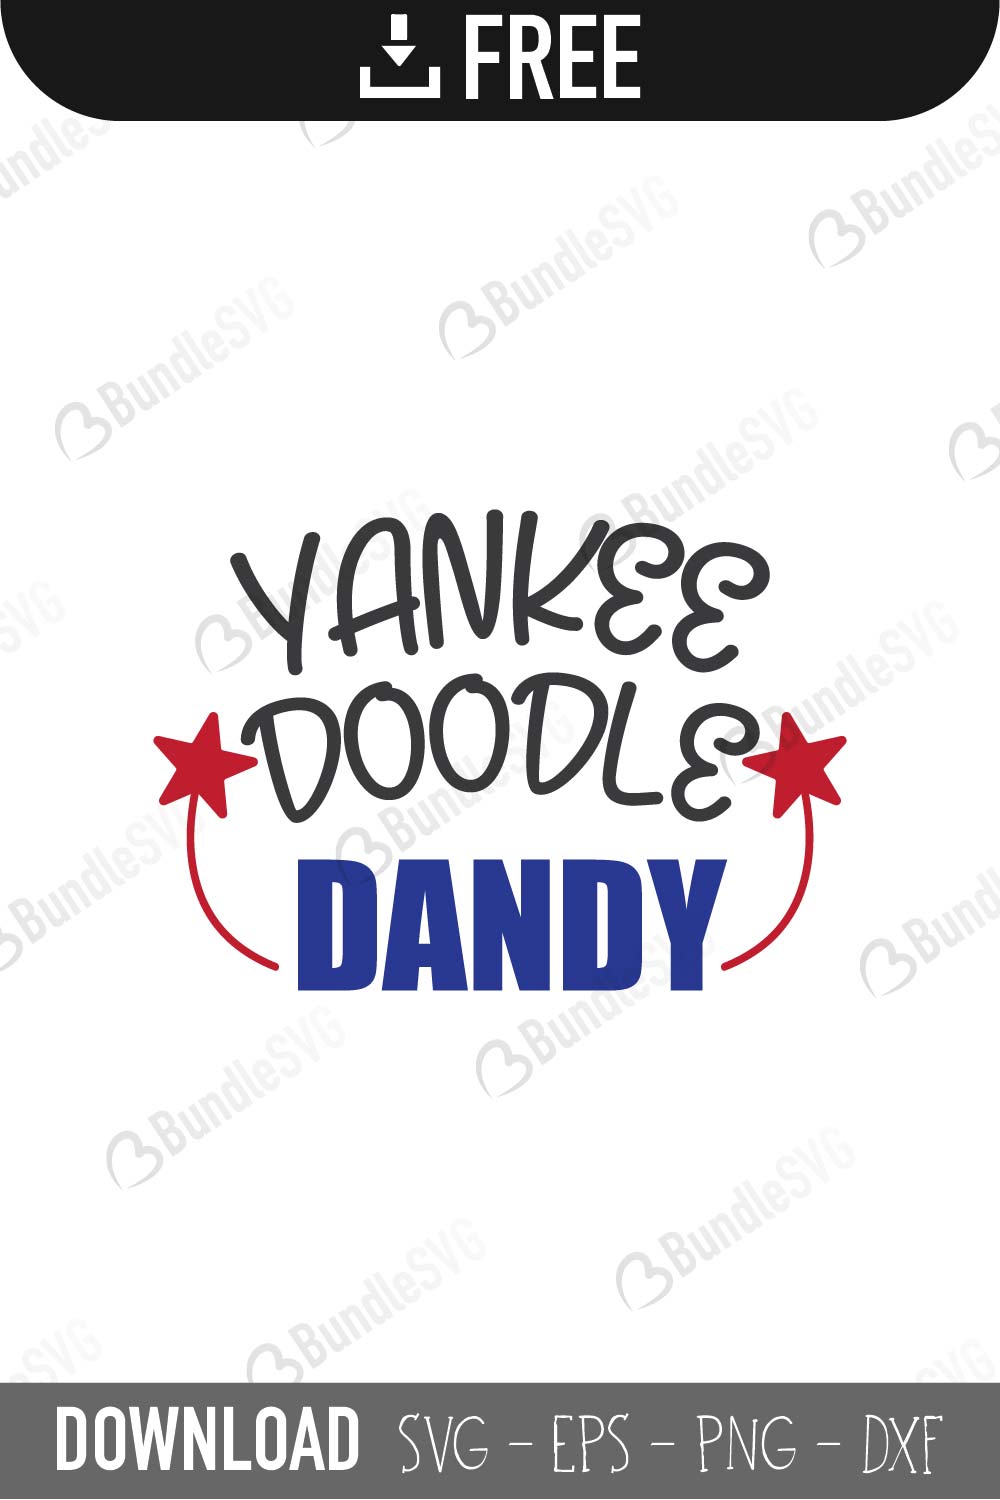 Yankee Doodle Darling SVG Cut File SVGs quotes-and-sayings food